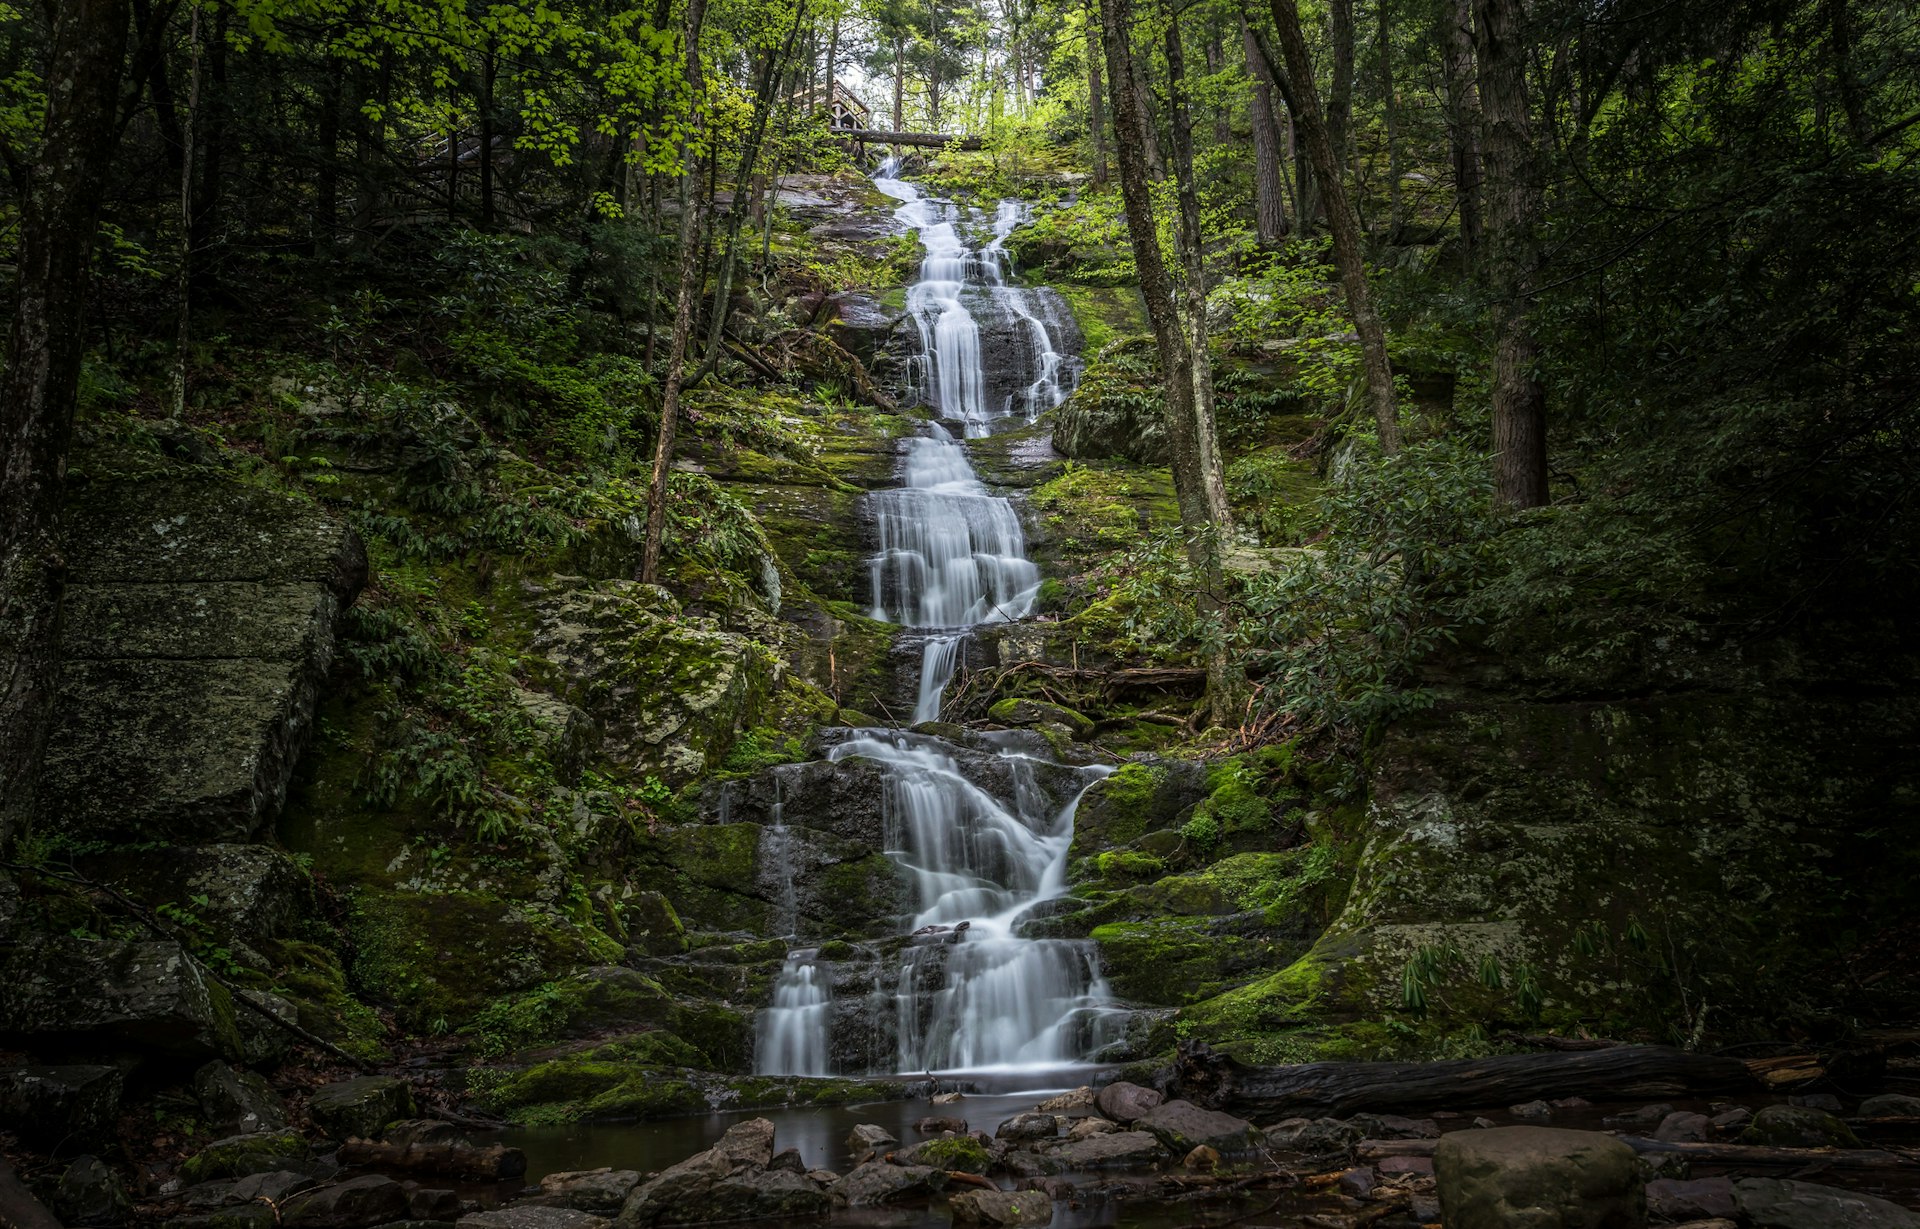 A tall waterfall surrounded by greenery in the Delaware Water Gap National Recreation Area, USA